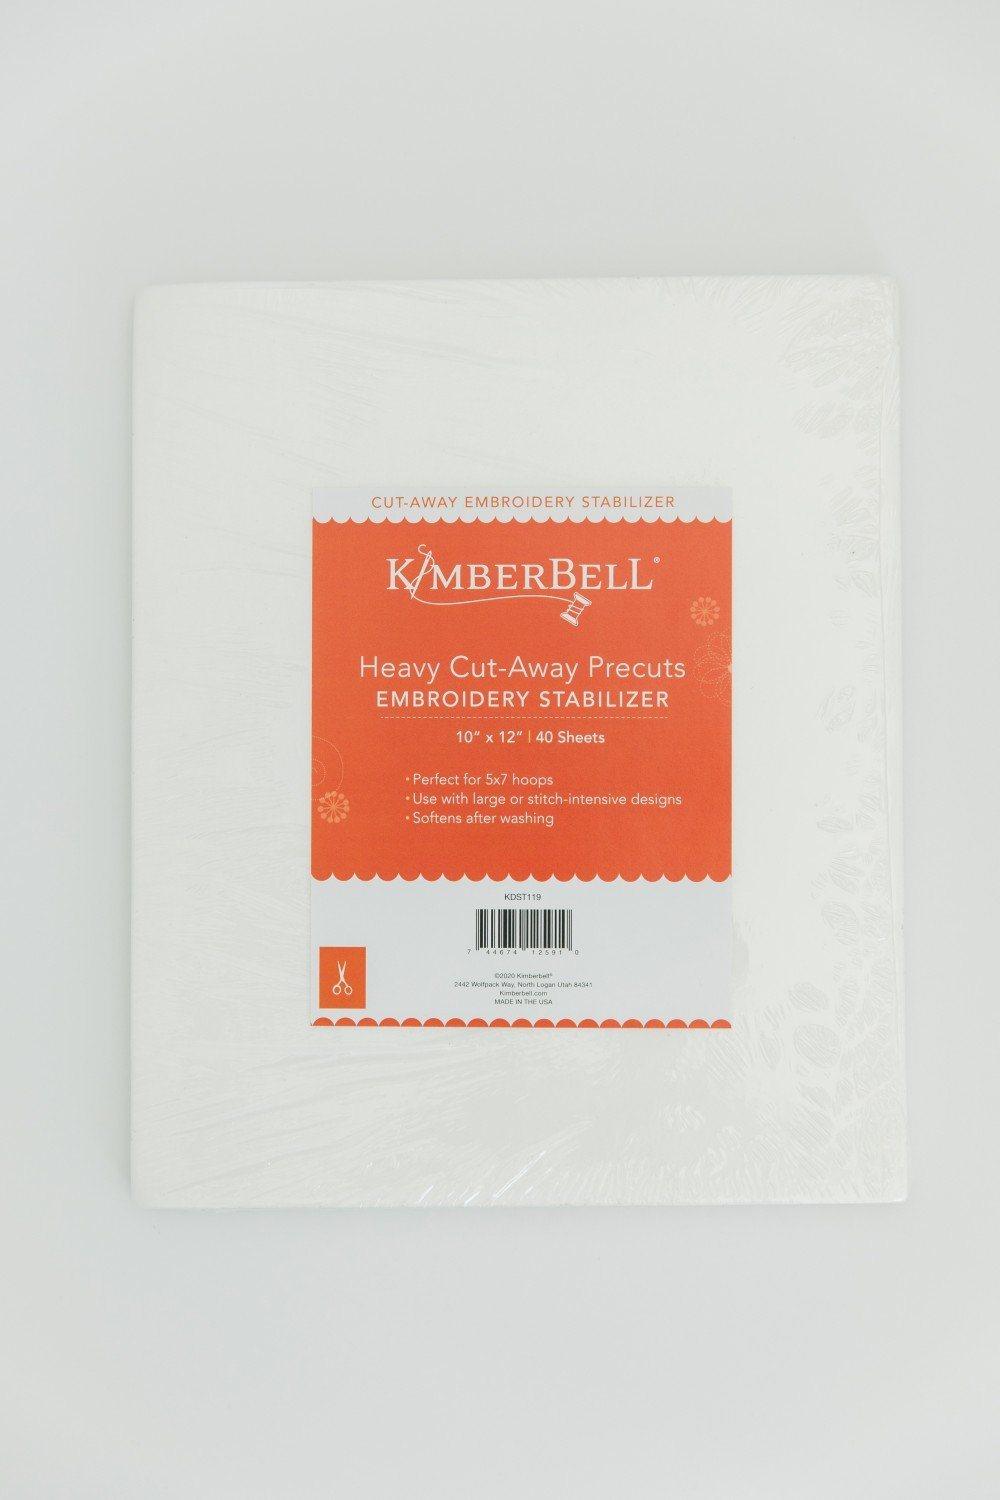 Cut-Away Stabilizer - Heavy - 12" x 10" Precuts - Package of 40 - Kimberbell - Kawartha Quilting and Sewing LTD.